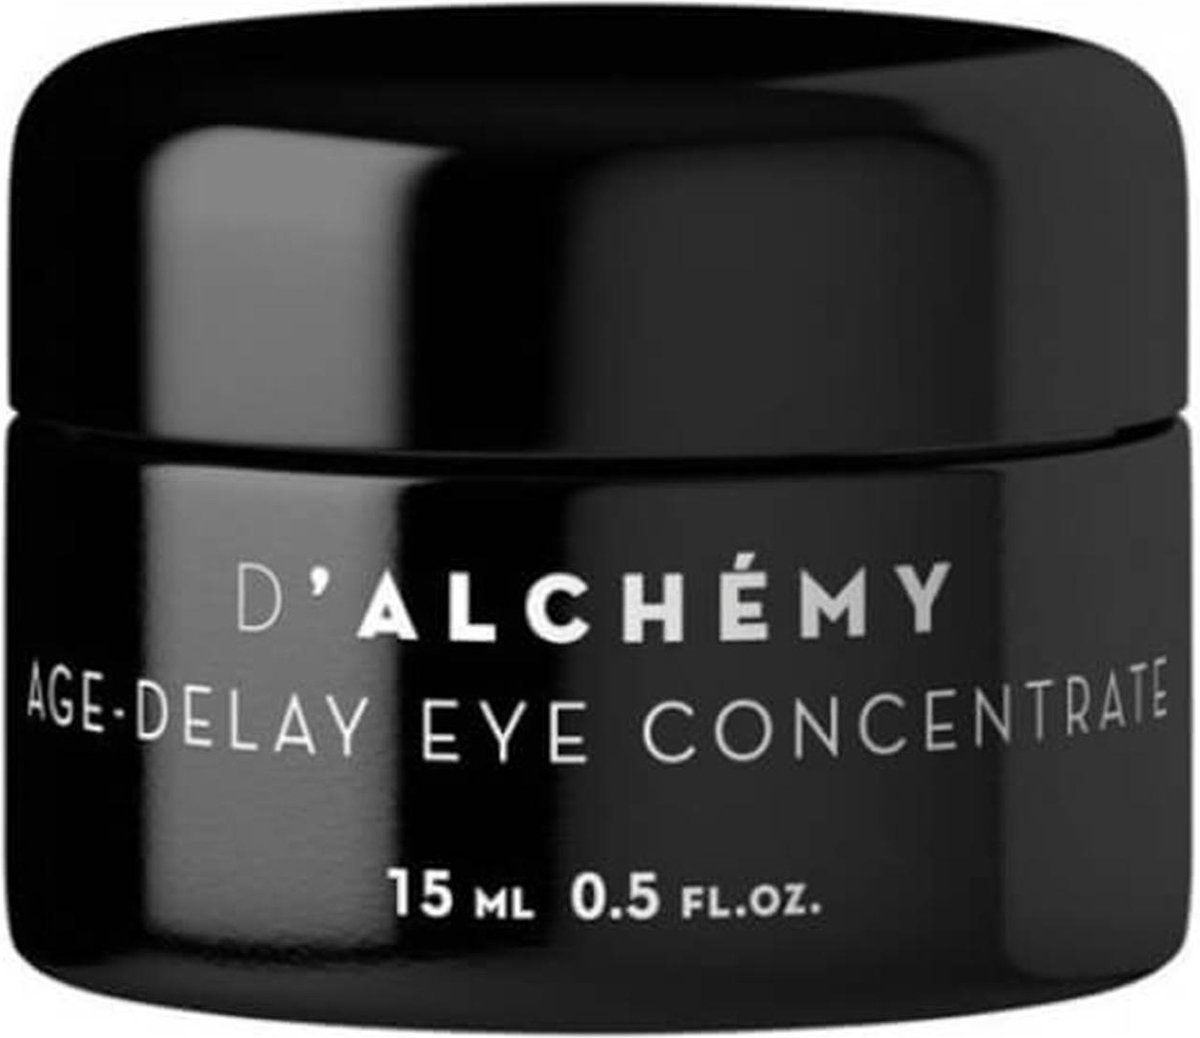 D'Alchemy - Age-Delay Eye Concentrate Concentrated Under Eyes To Eliminate Signs Of Fatigue 15Ml